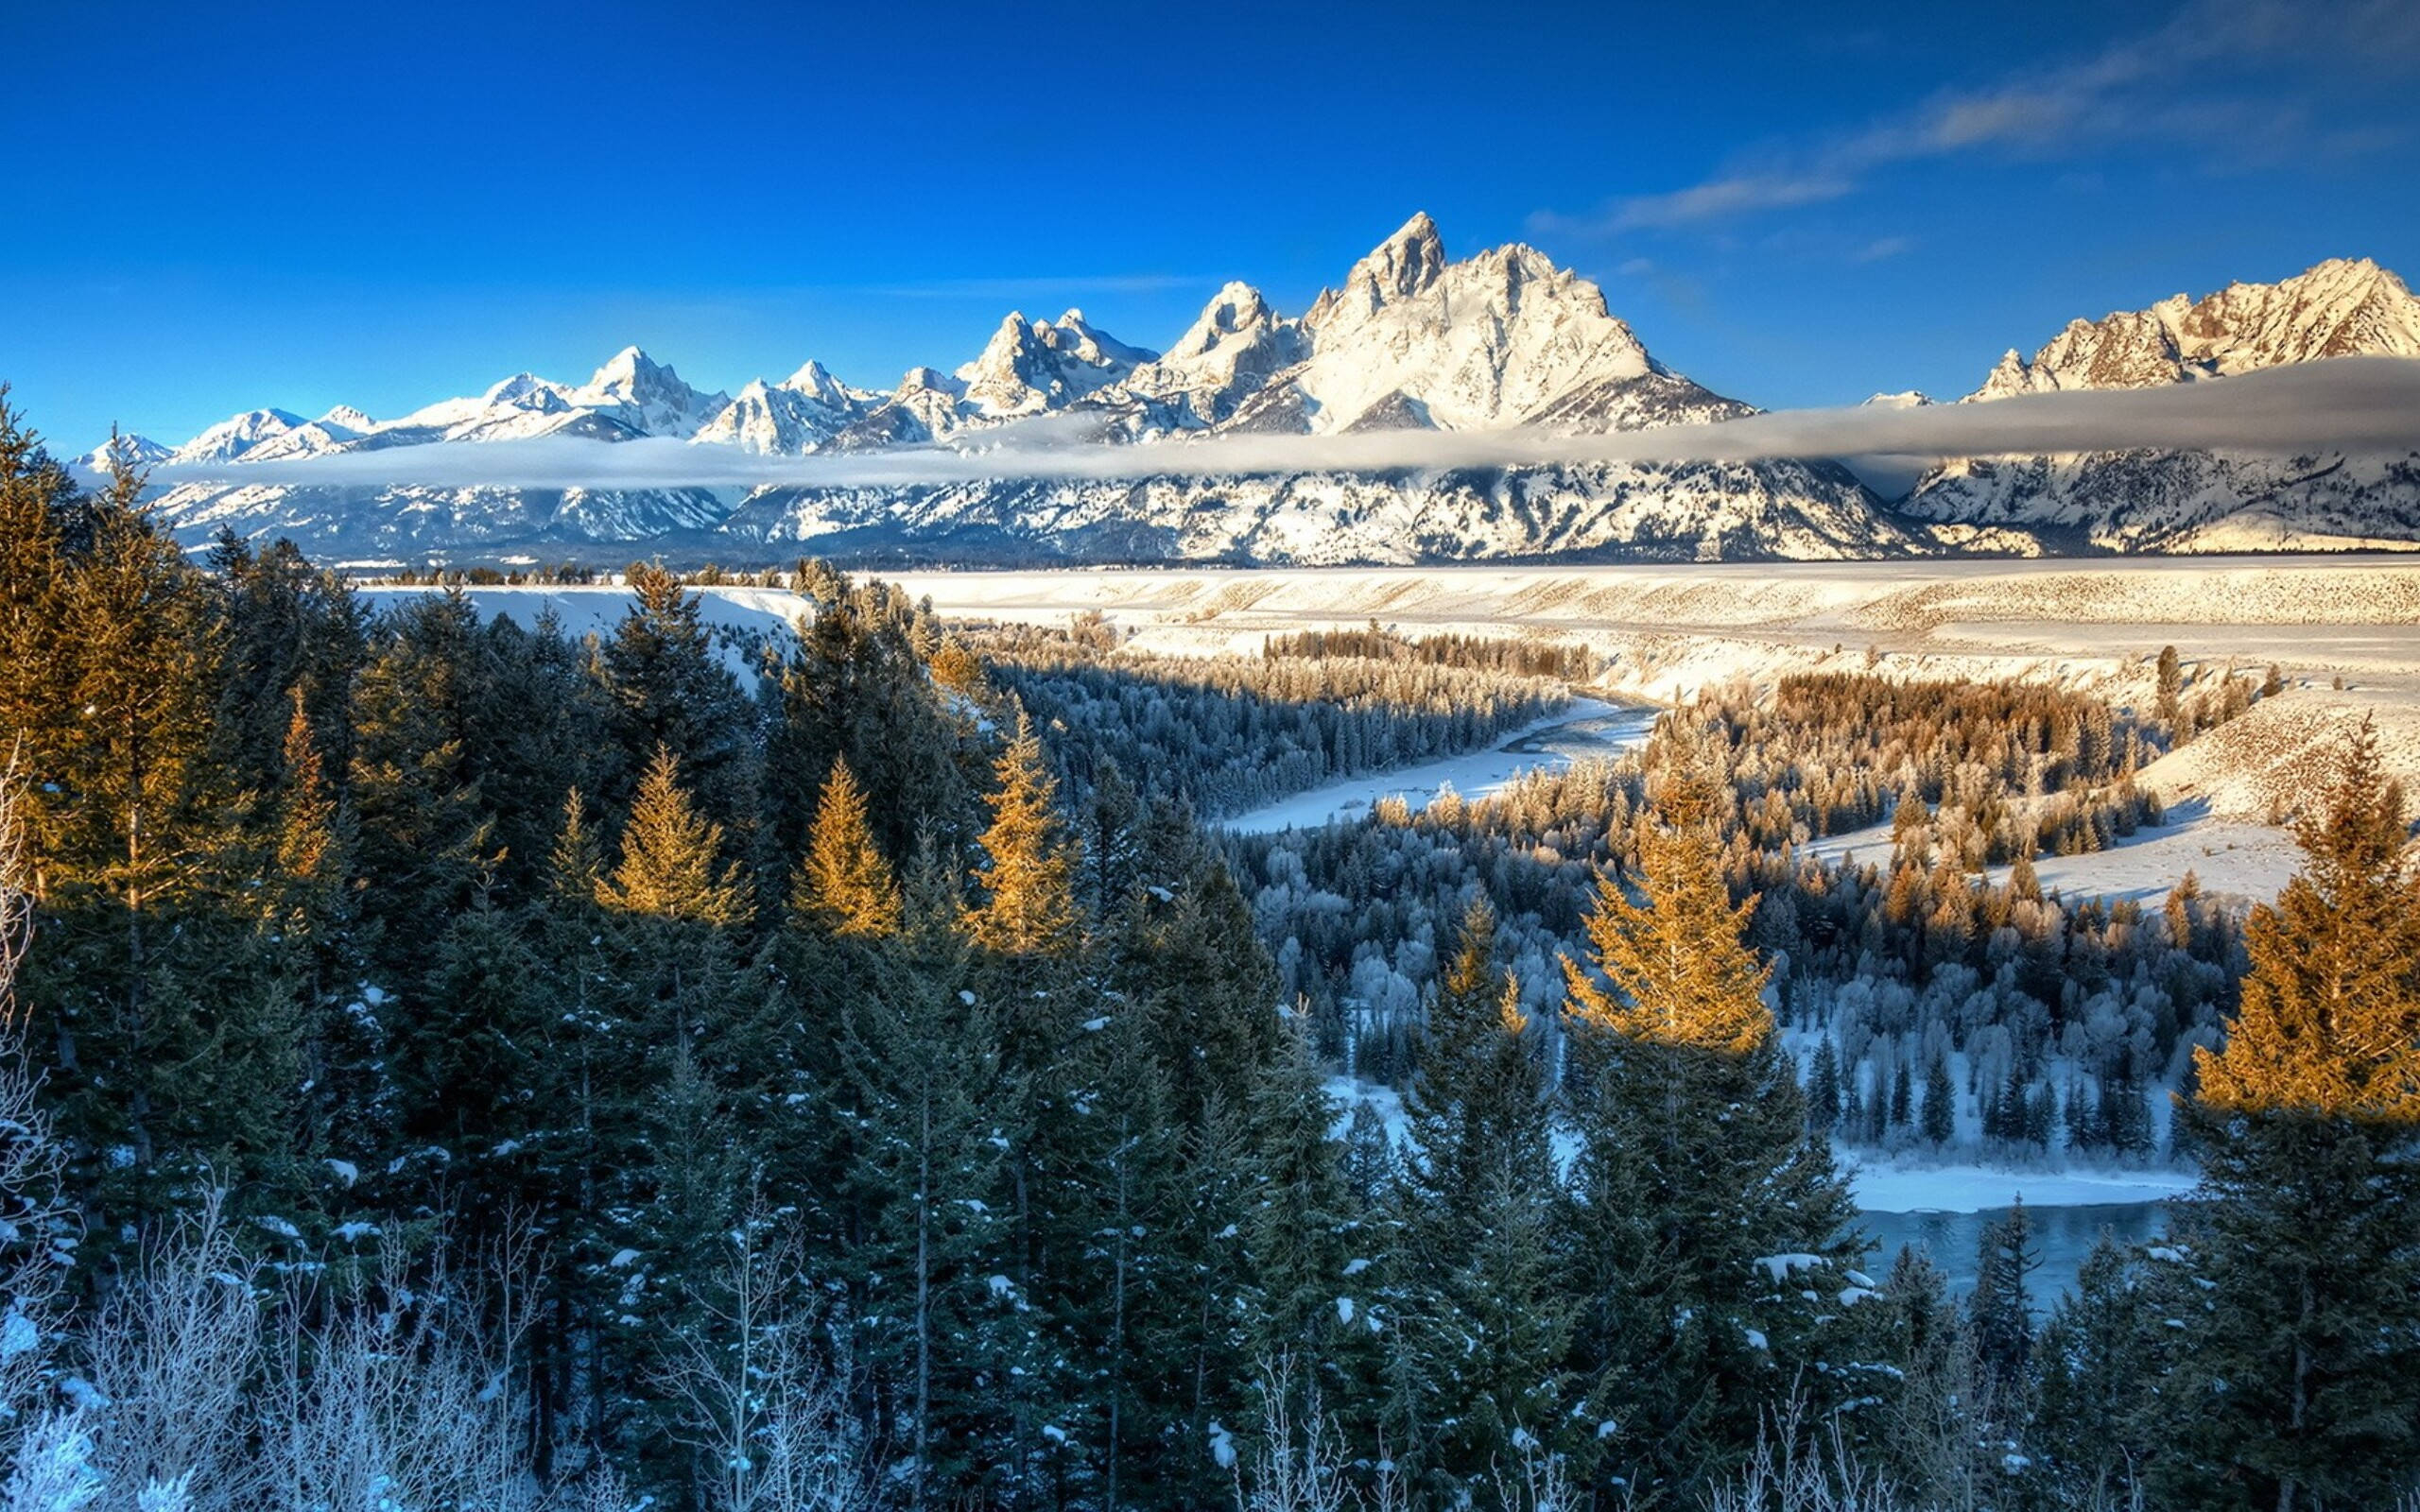 2560x1600 Download Yellowstone National Park Winter Landscape Wallpaper | Wallpapers .com